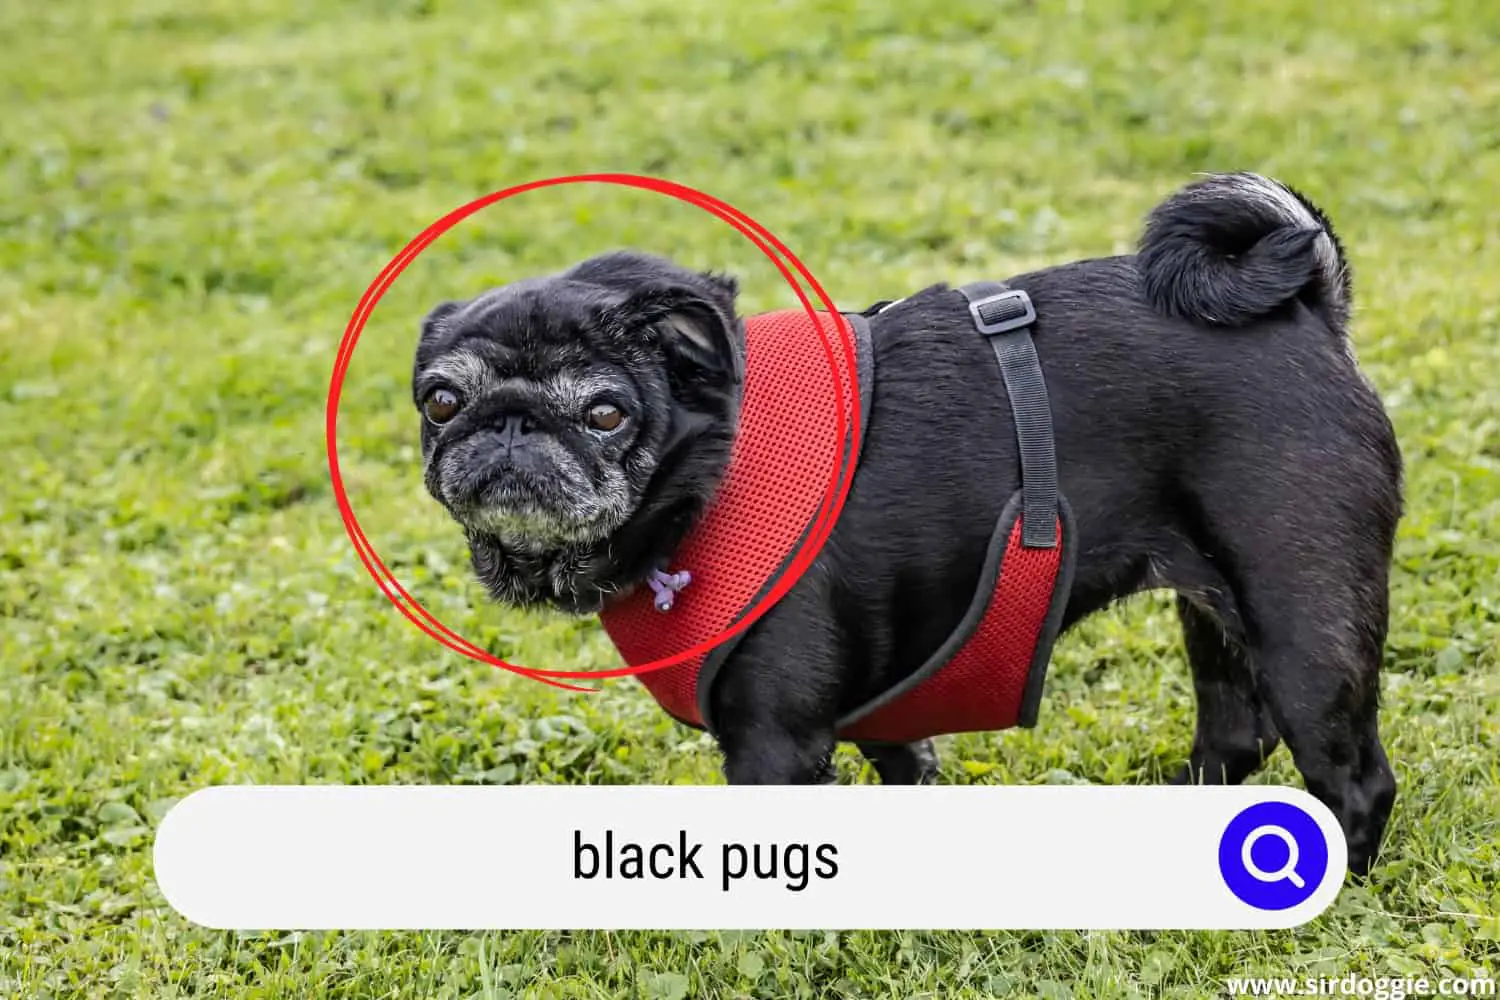 Black Pug with Red Harness